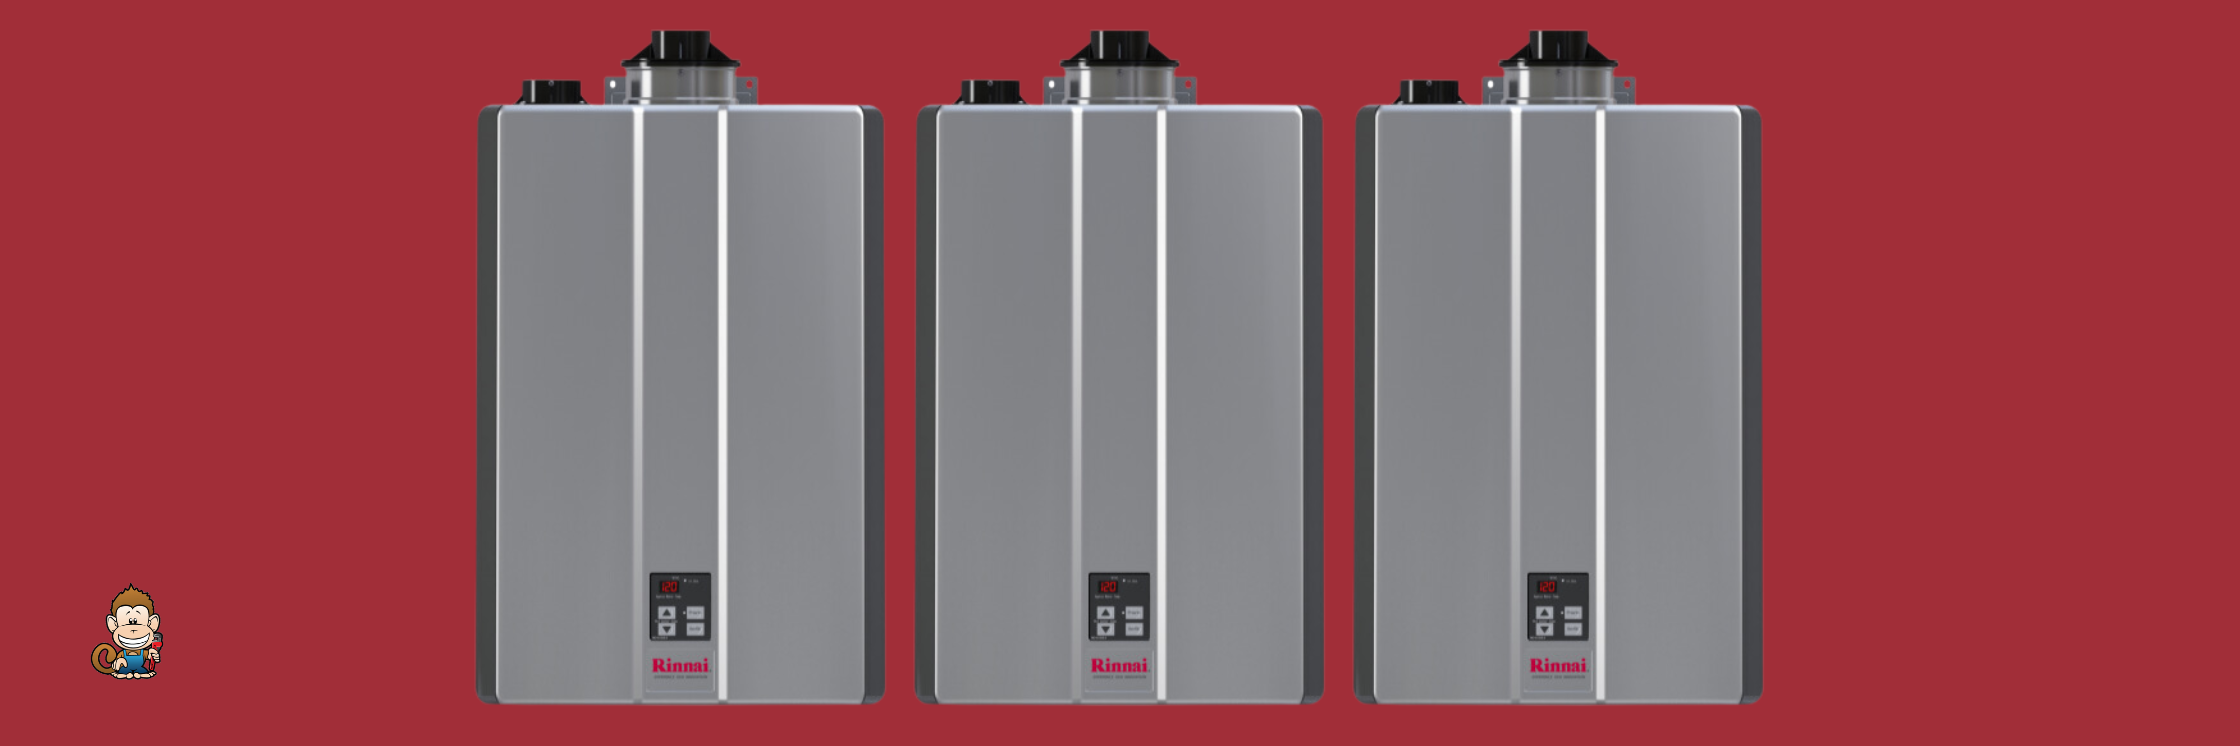 Rinnai Brand Review: Tankless Water Heaters